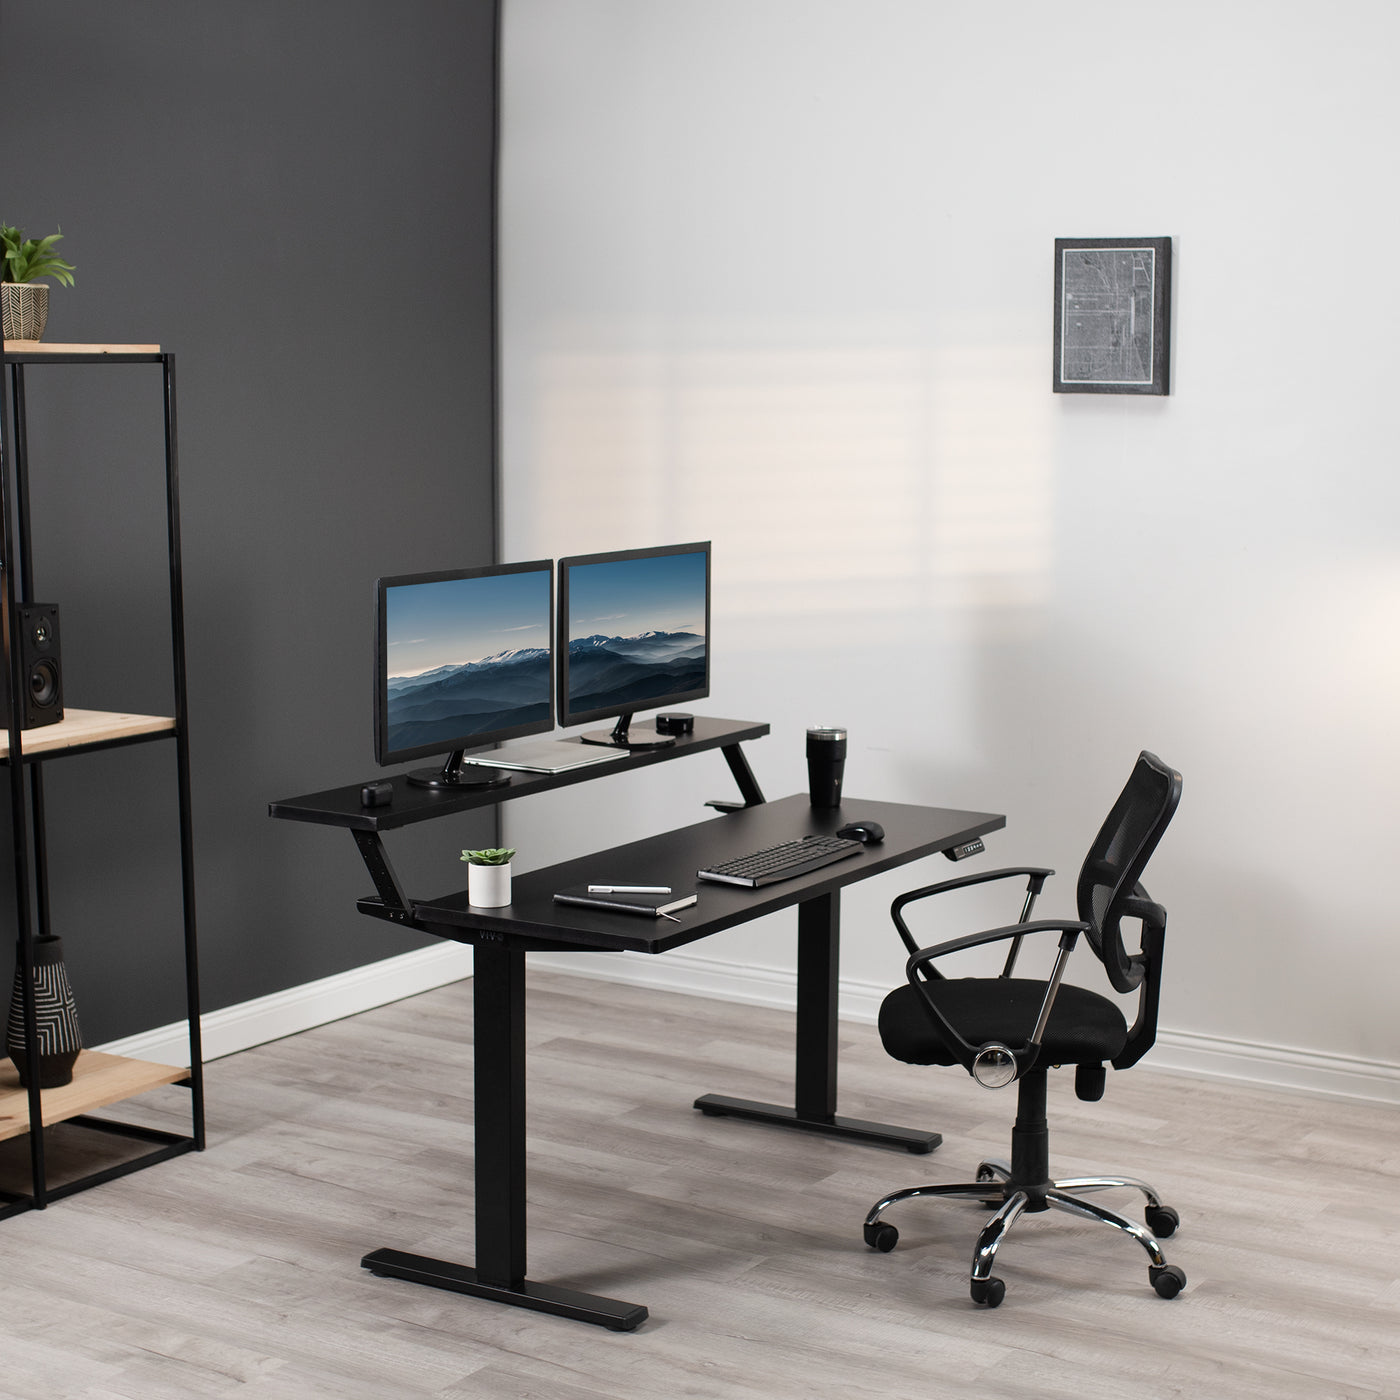 Still modern office space with electric desk chair and two monitors elevated on an ergonomic split desk frame.